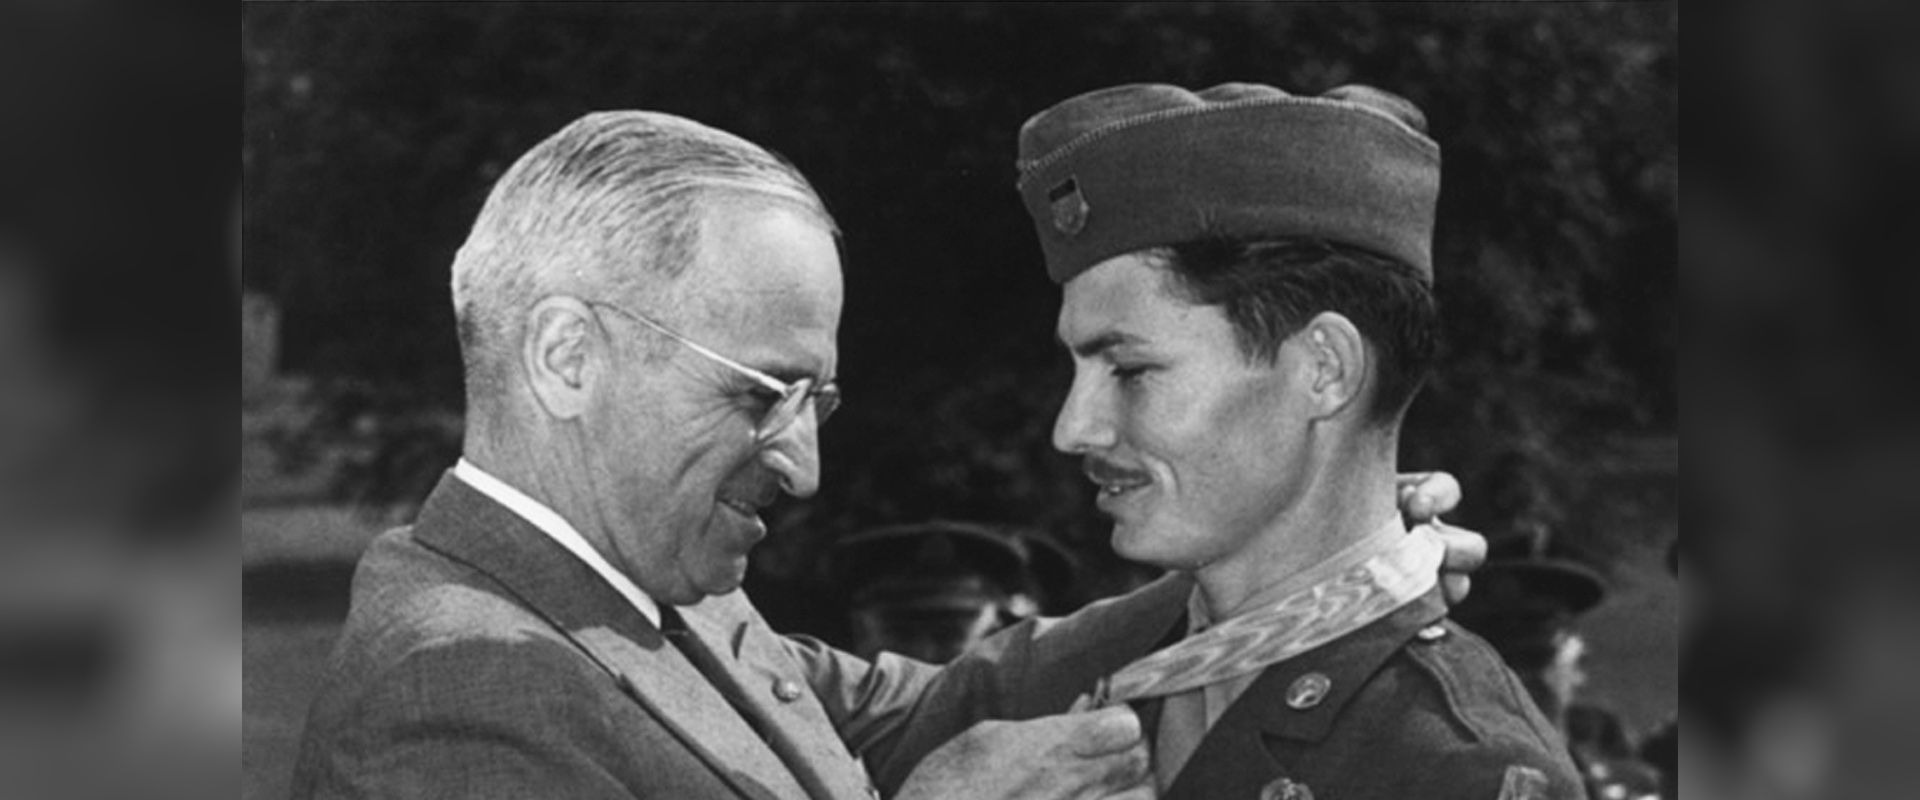 Doss recieves his medal from the President